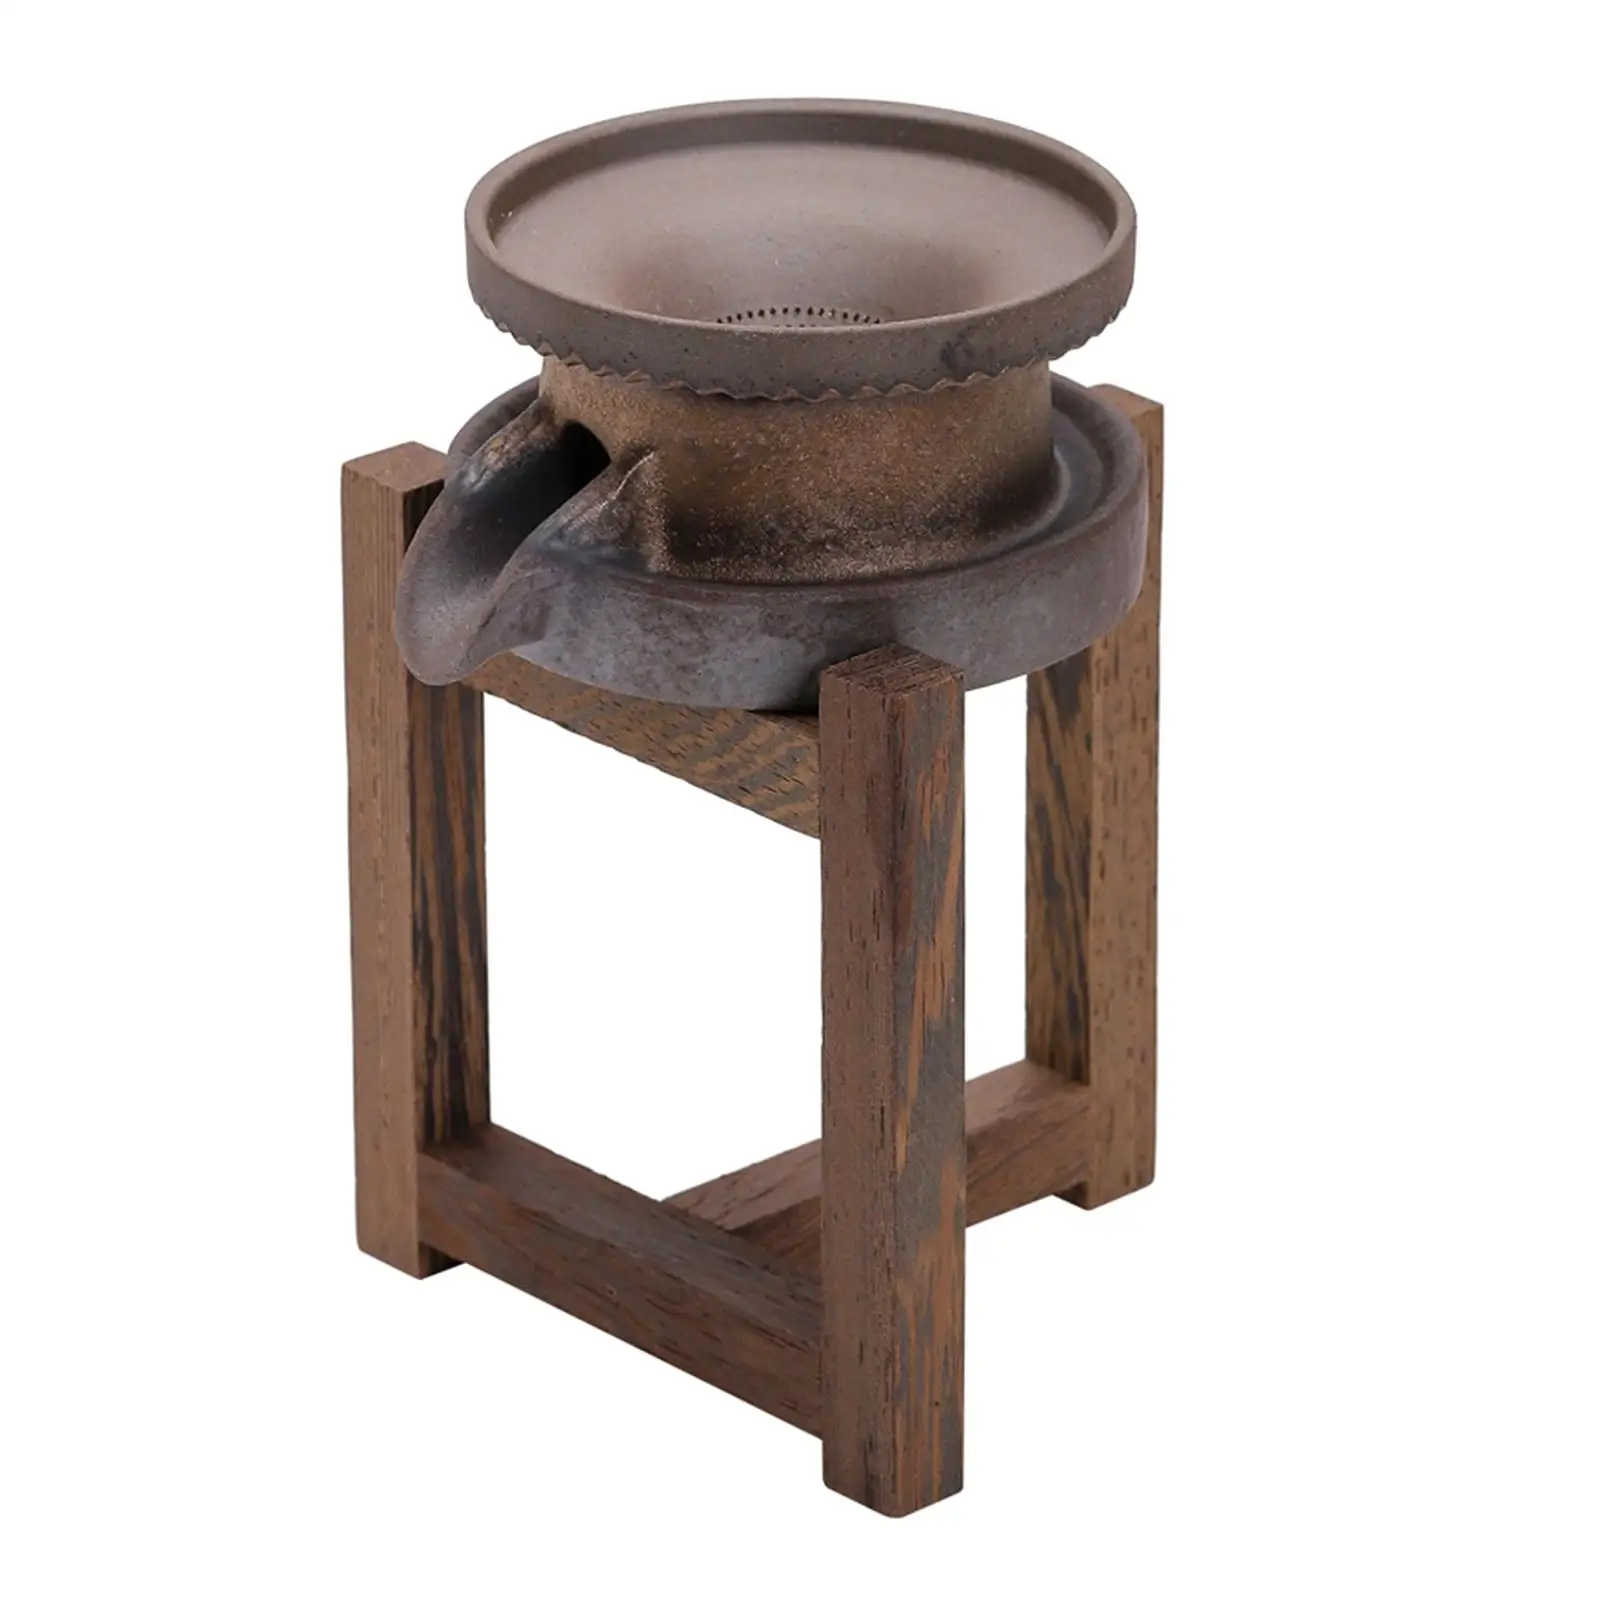 Tea Filter Set Chinese Kung Fu Drinkware Ceramic Tea Funnel Holder with Wooden Shelf Tea Compartment for Shop Cafe Holiday Gifts